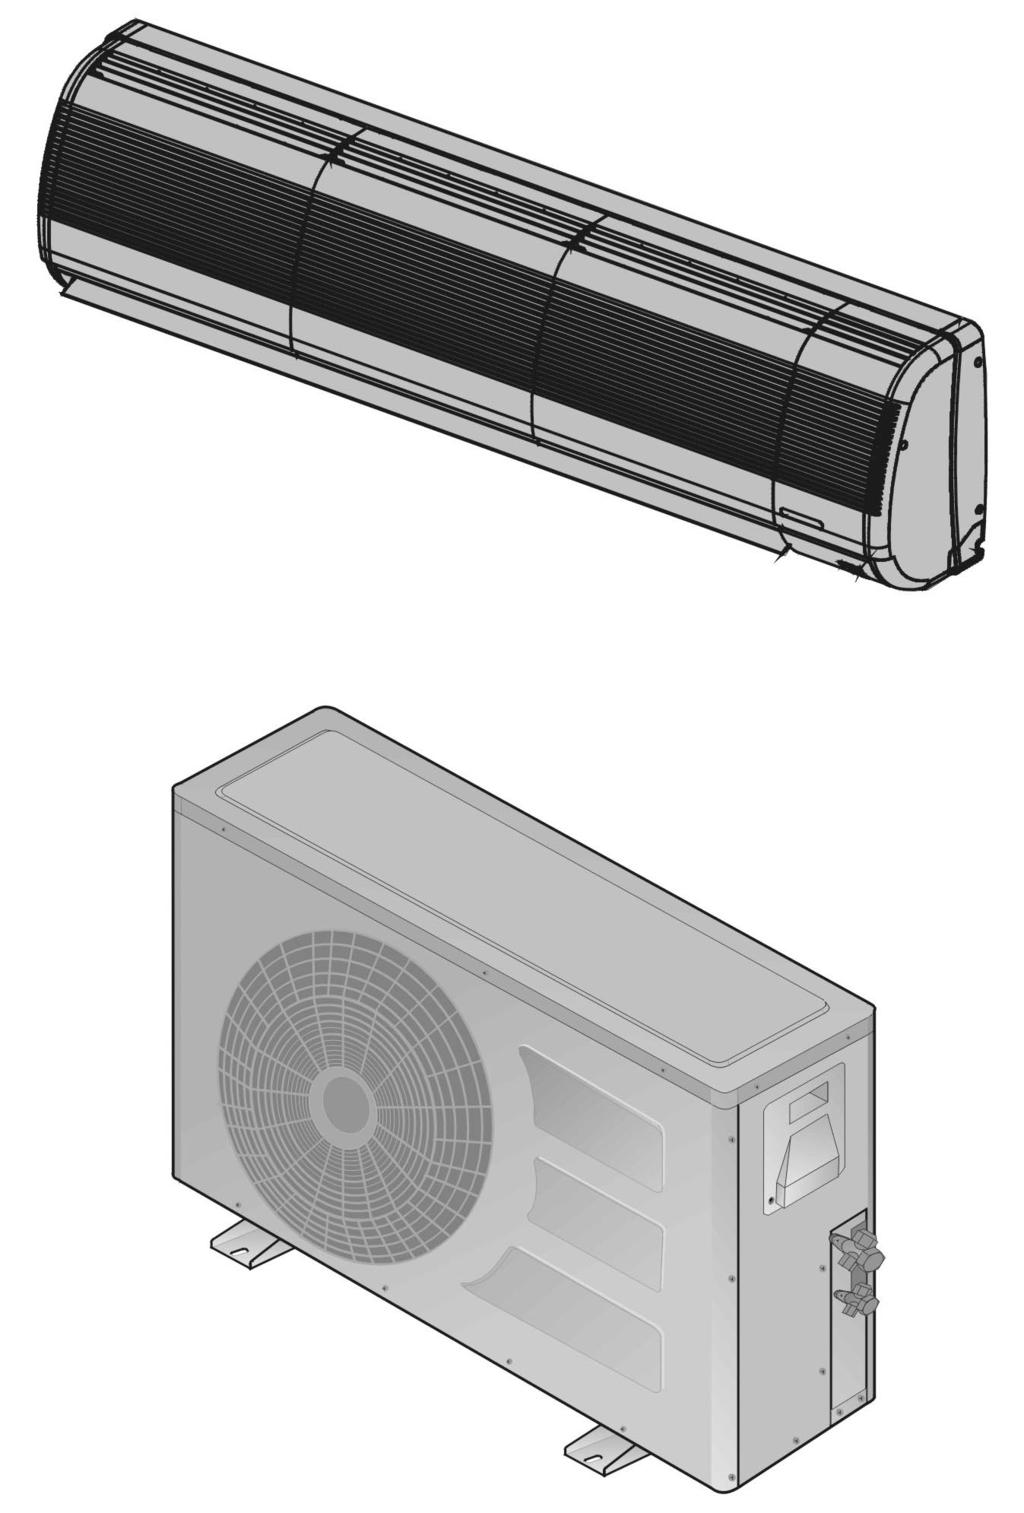 SPLIT WALL-MOUNTED AIR CONDITIONER MODELS: WS 090C / WS 090H /